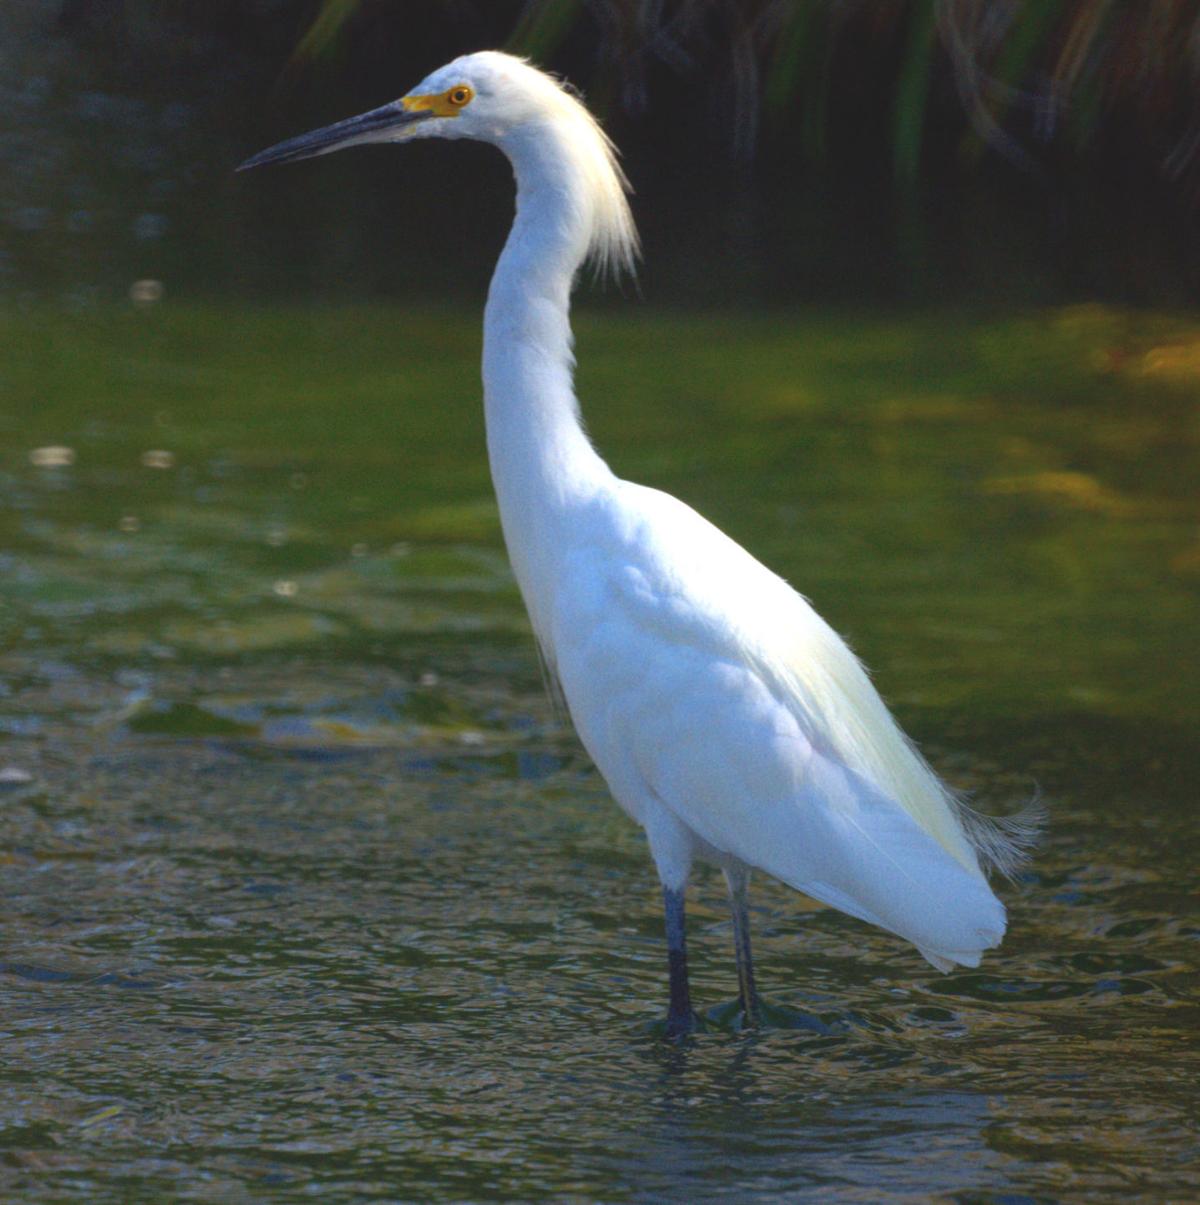 What exactly was that white heron of fiction fame? Lifestyles